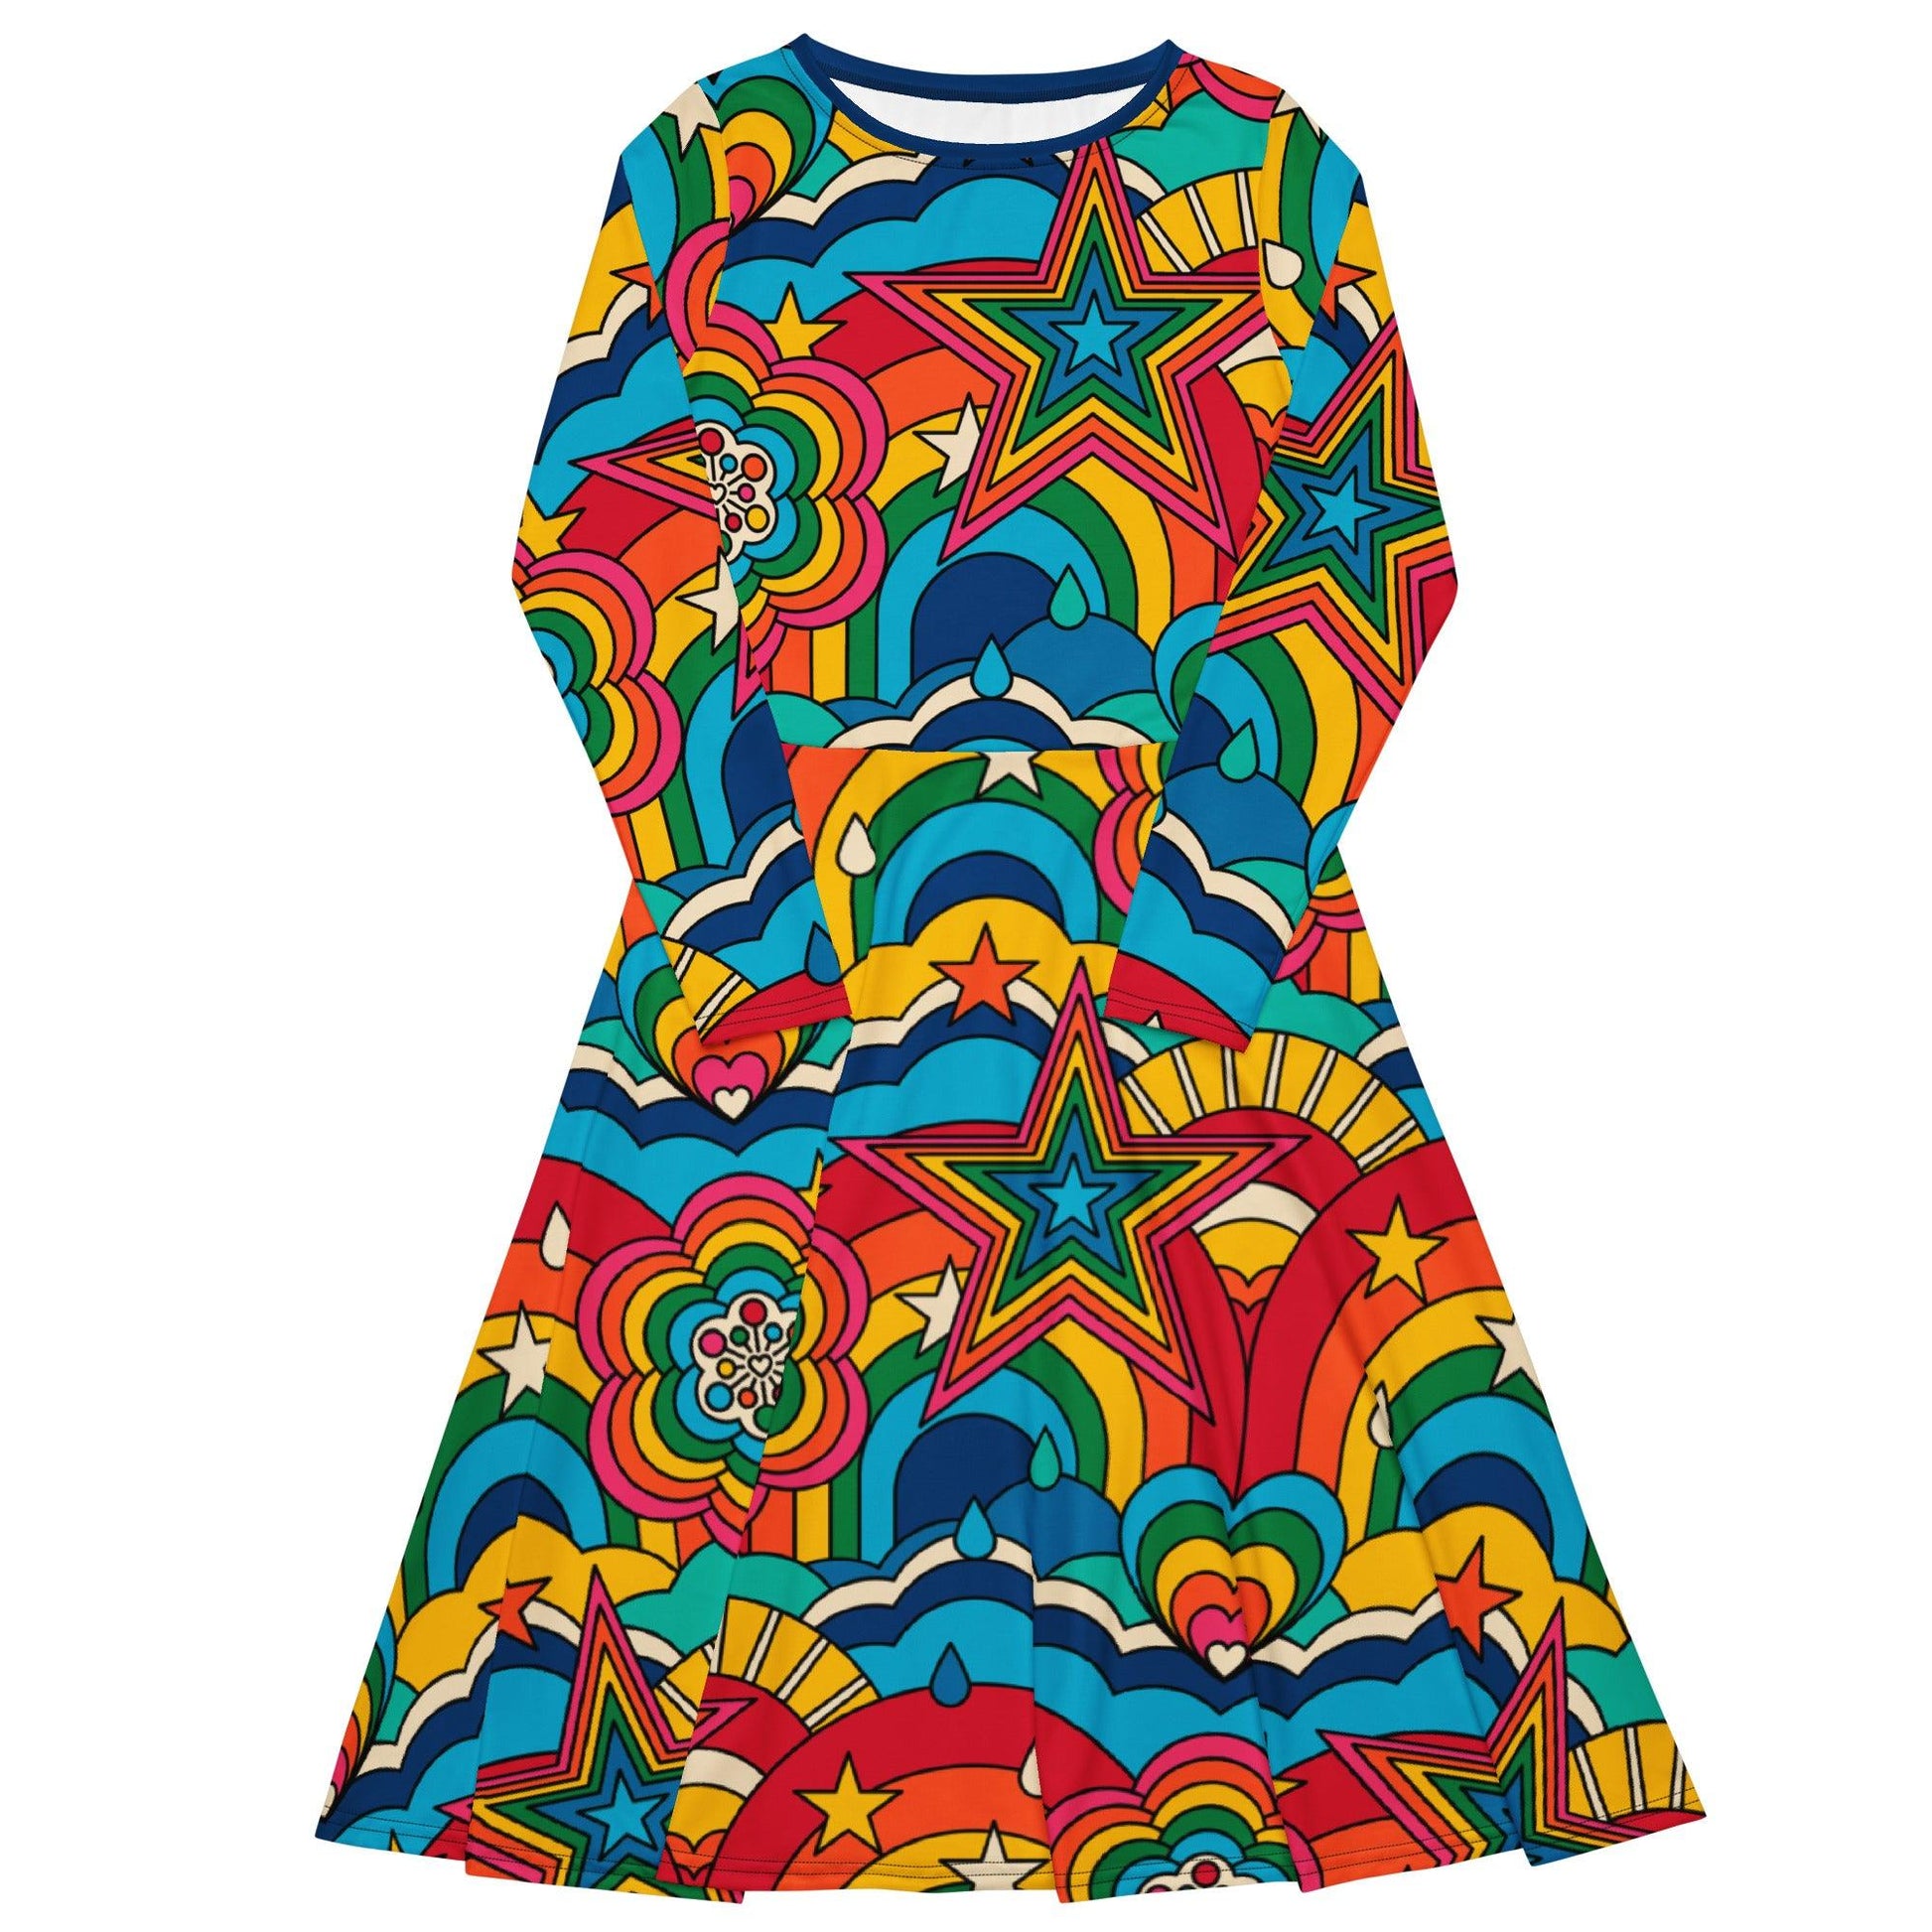 RAINBOW RAVE - Midi dress with long sleeves and handy pockets